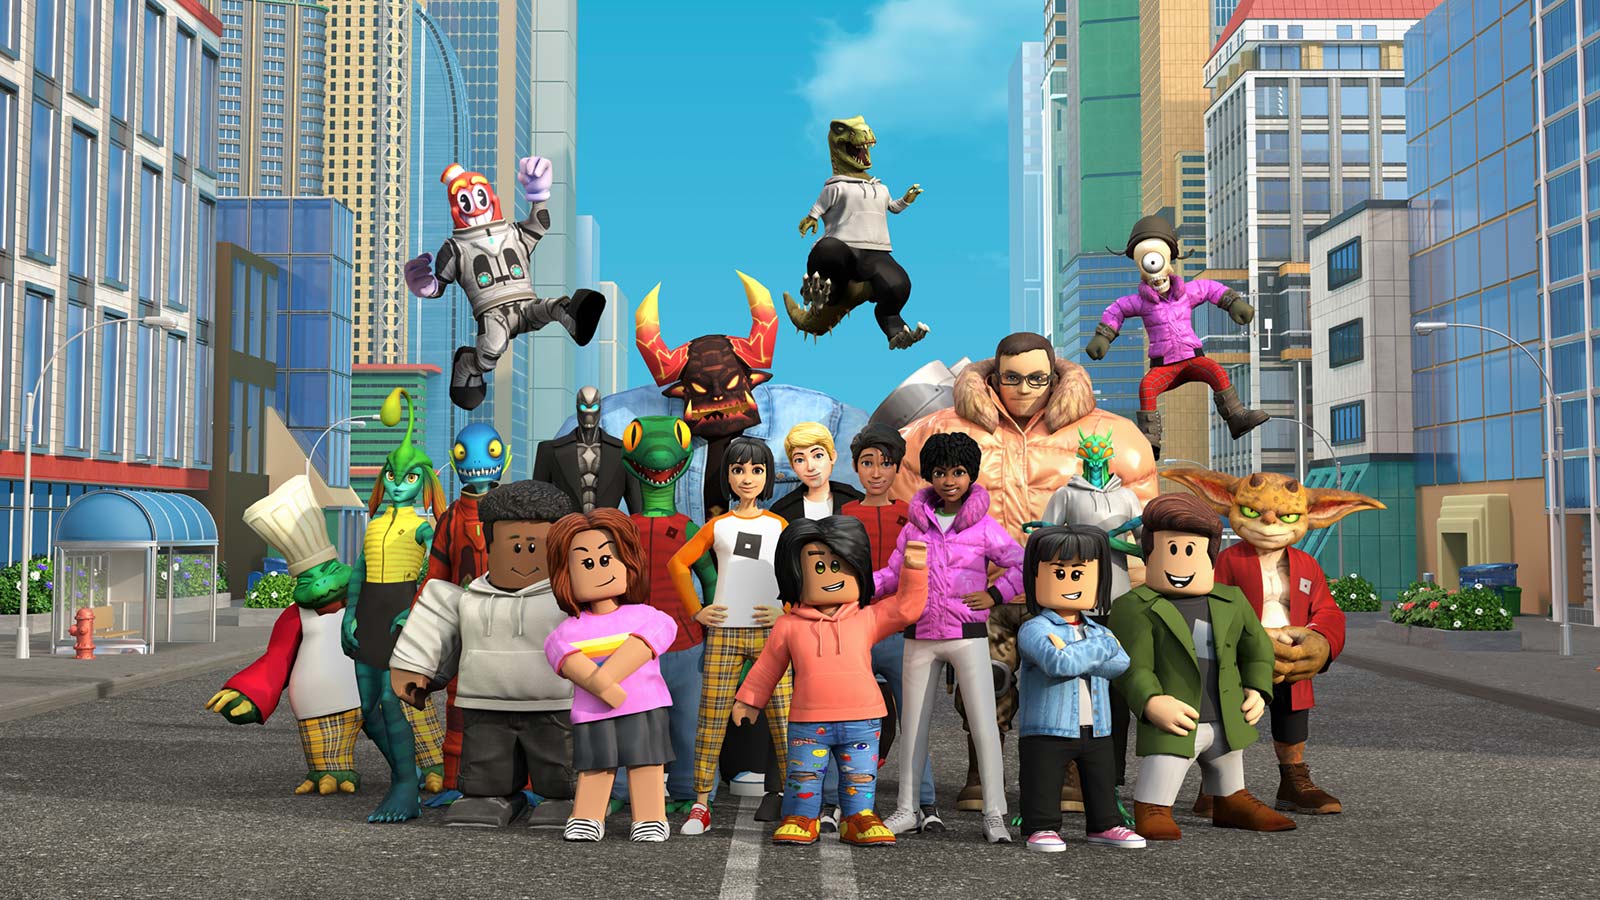 An image of a dozens of Roblox characters standing in front of a virtual city. There are all kinds of characters — some look like the typical Lego-like characters, and others look like cartoon characters.